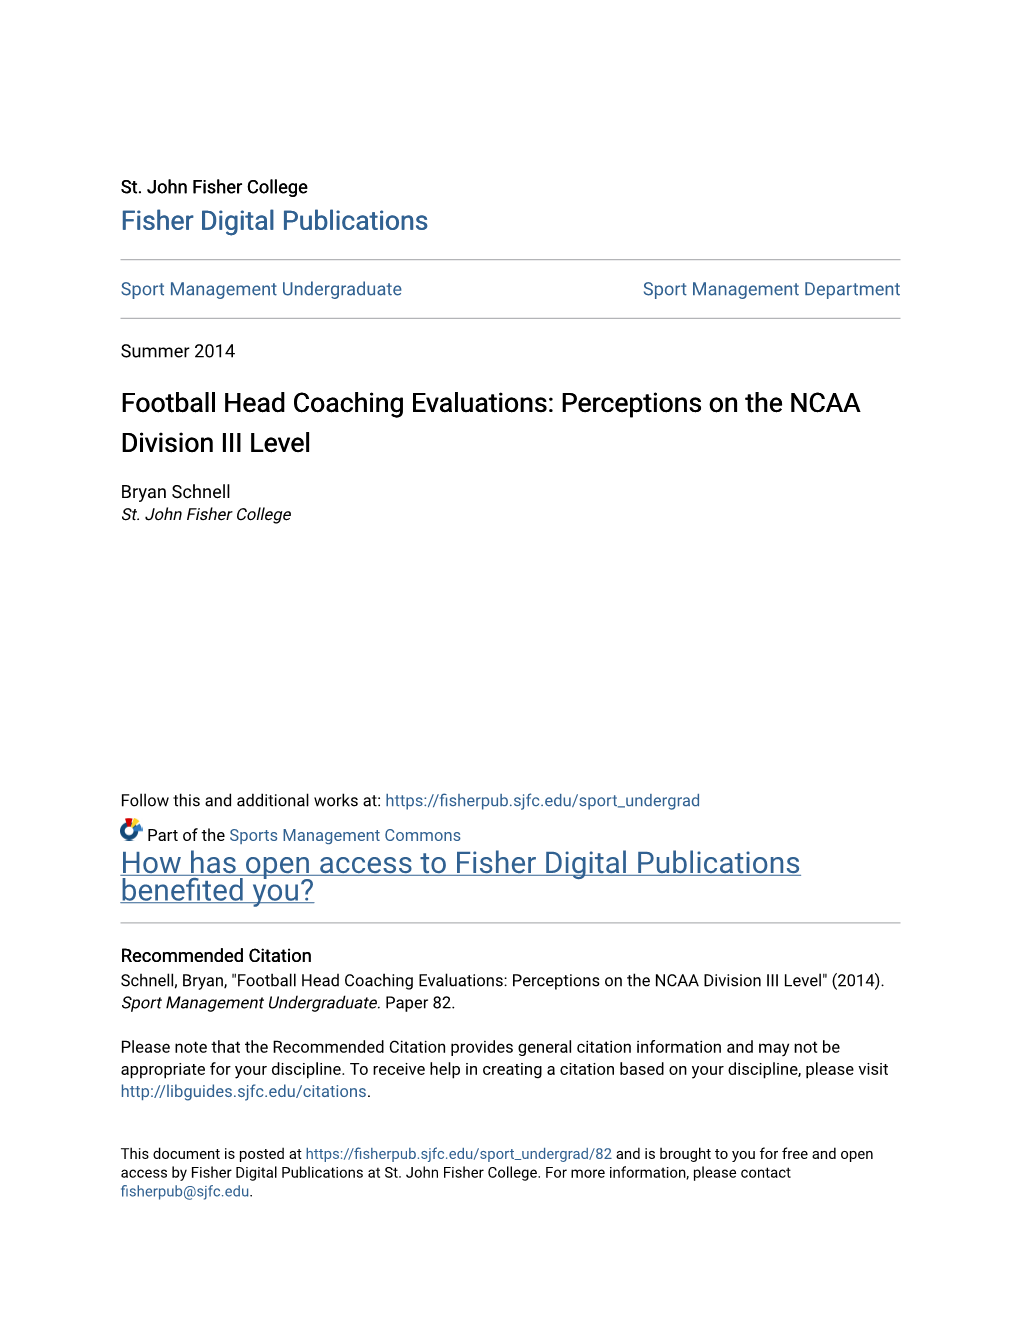 Football Head Coaching Evaluations: Perceptions on the NCAA Division III Level